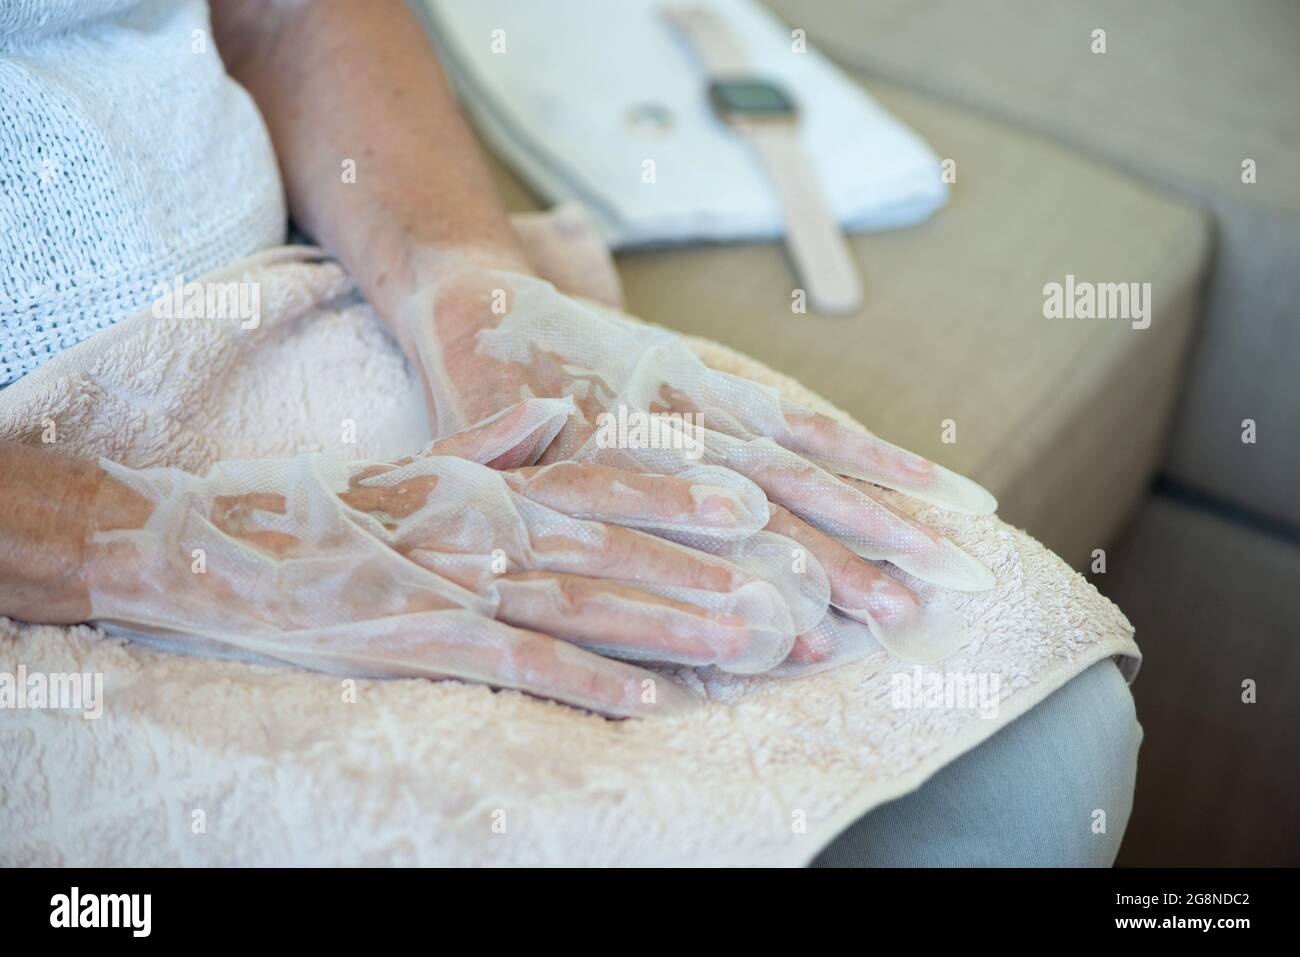 Senior woman wearing hand mask gloves. Moisturizing gloves to soften and protect hand skin. Hands close up. Stock Photo